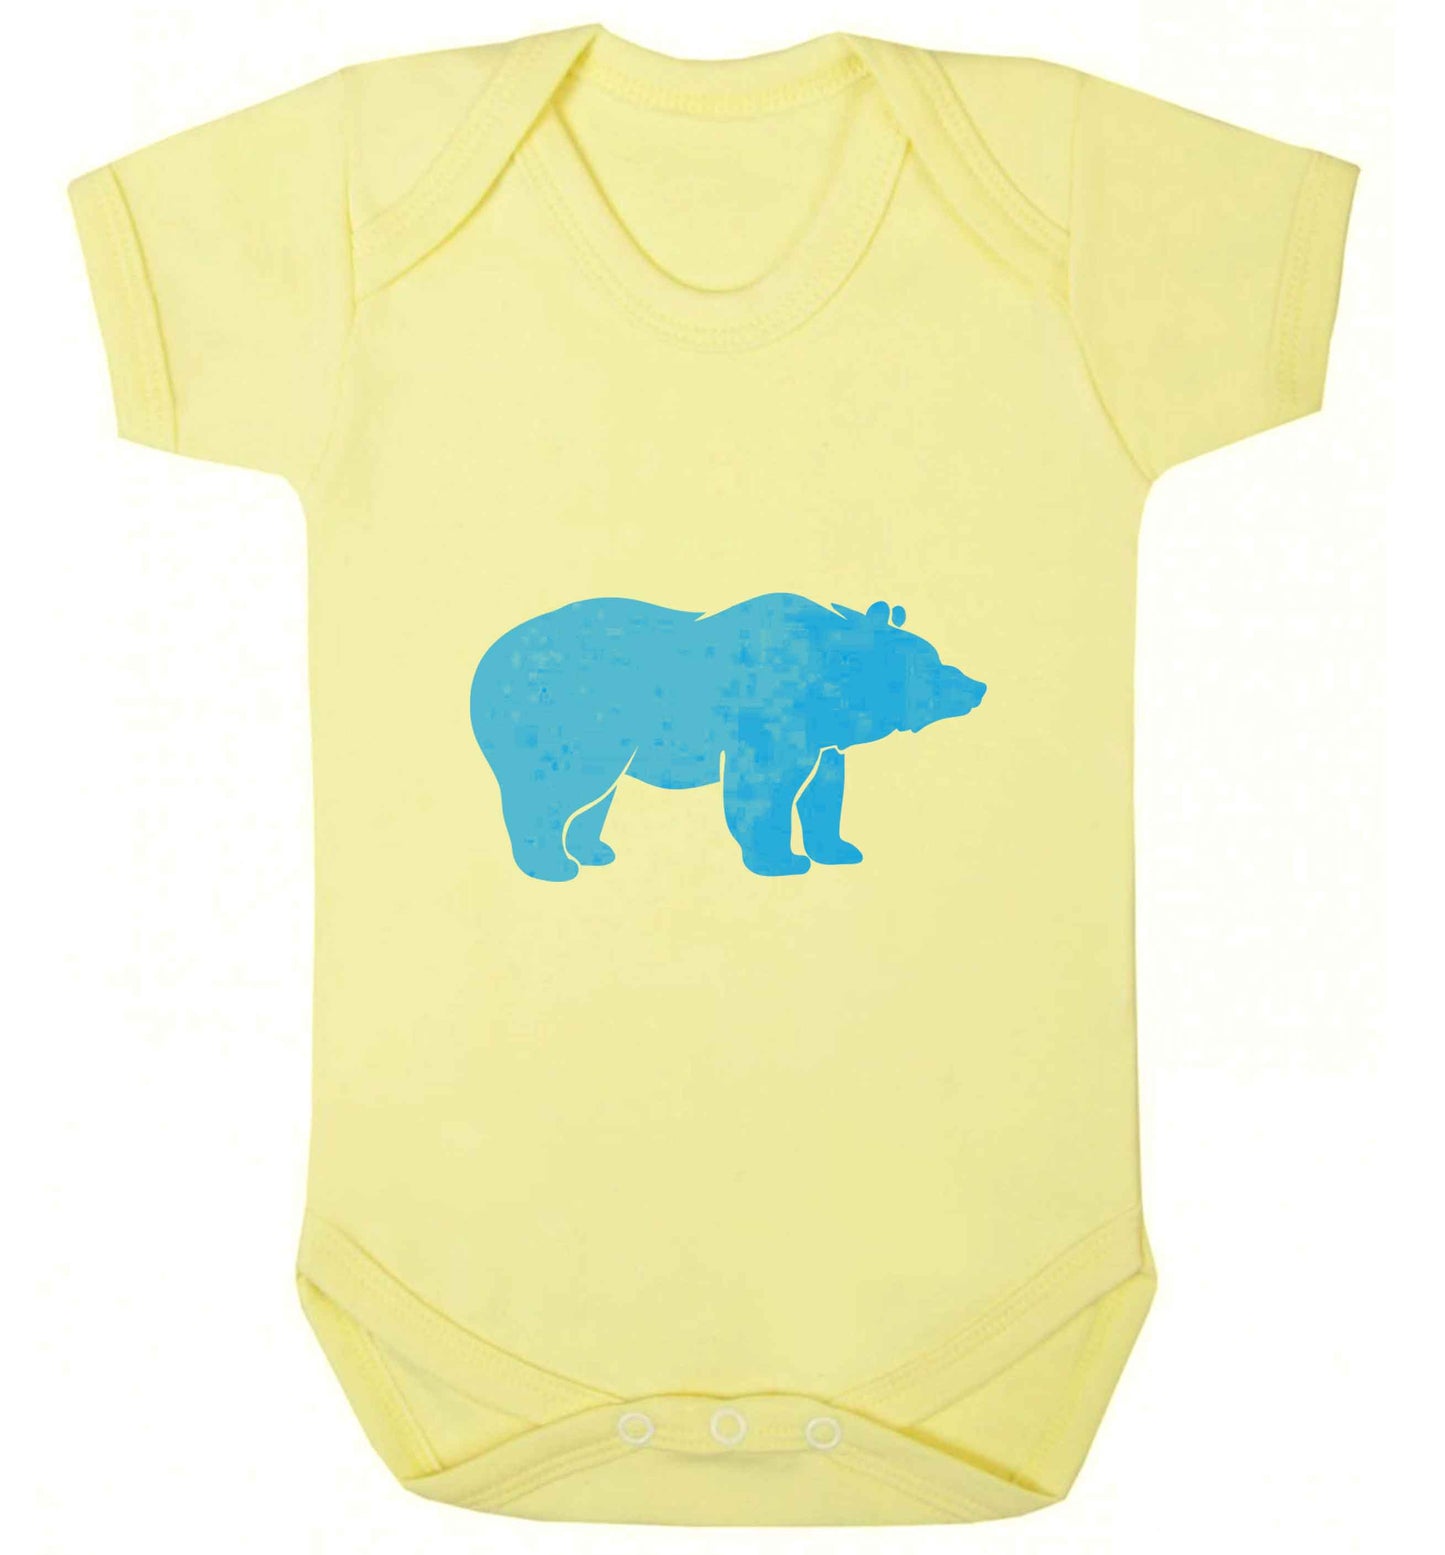 Blue bear baby vest pale yellow 18-24 months